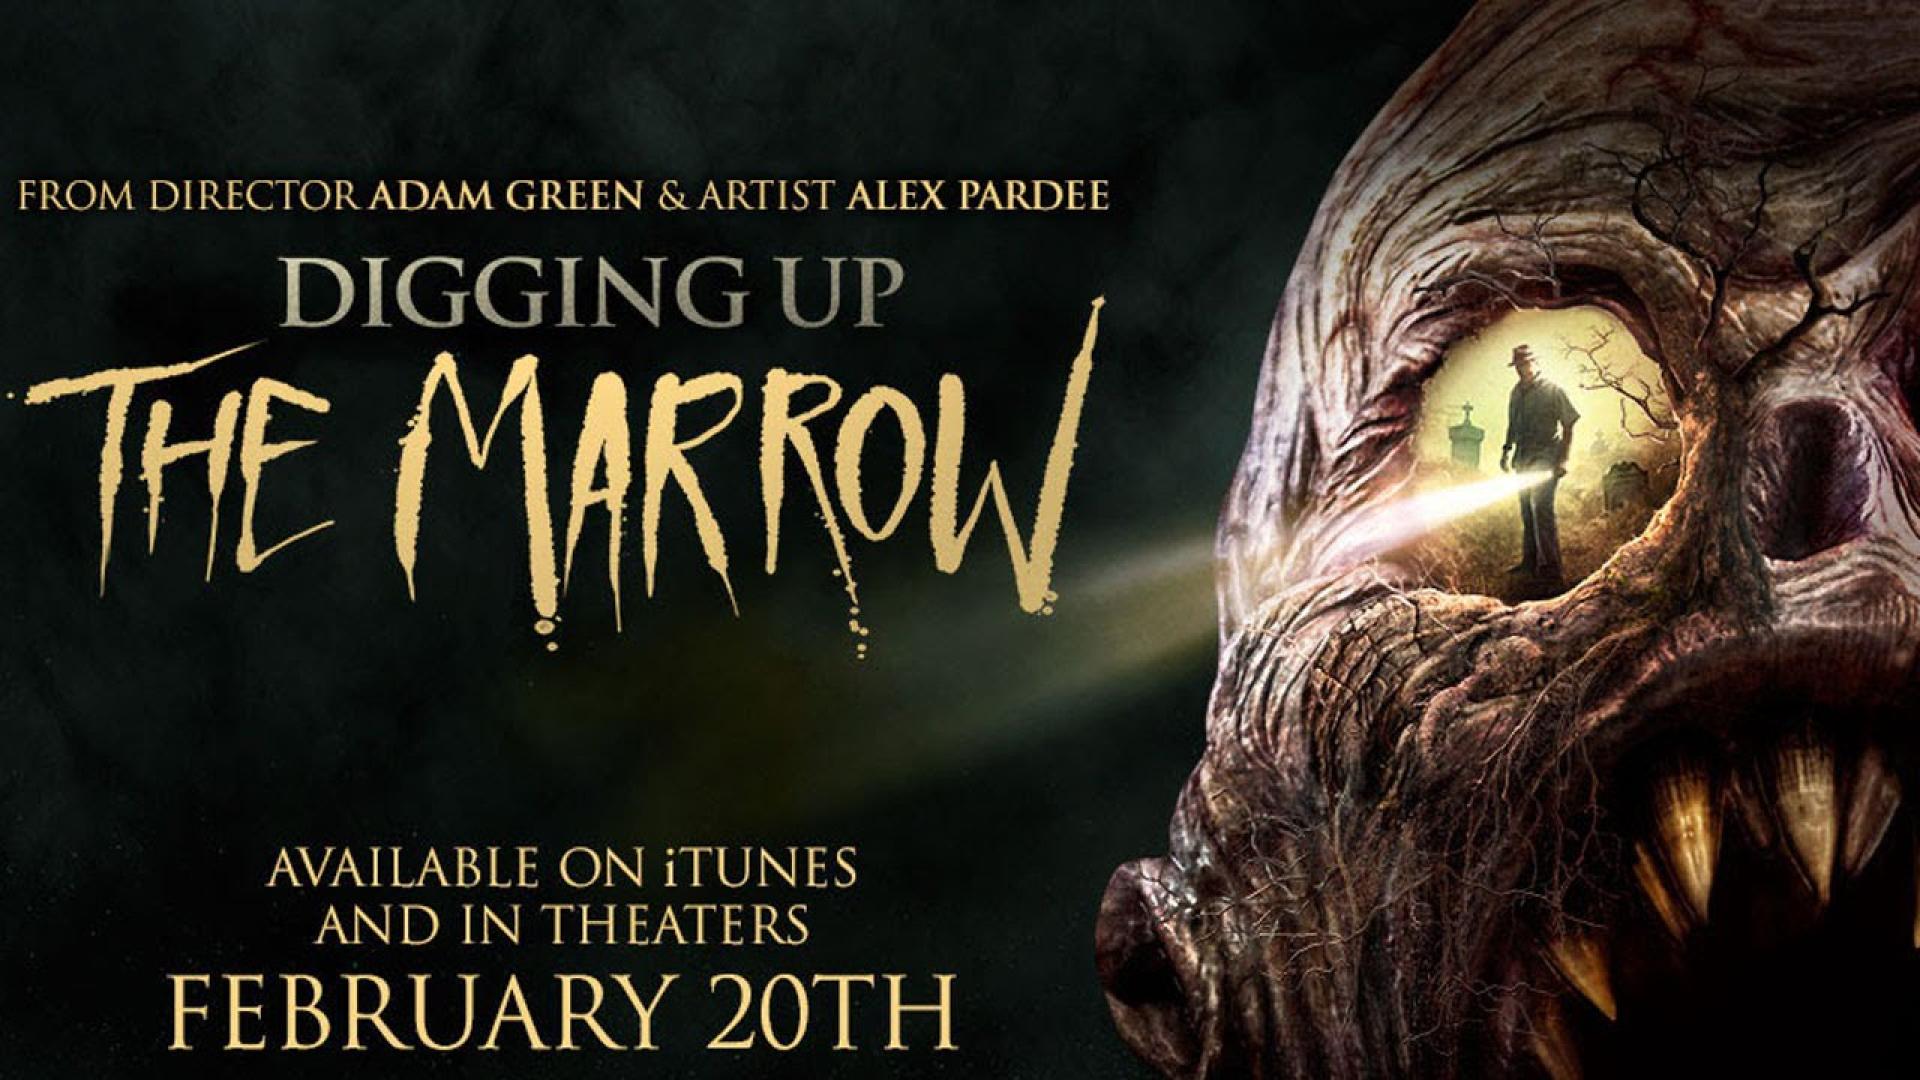 Digging Up the Marrow (2014)